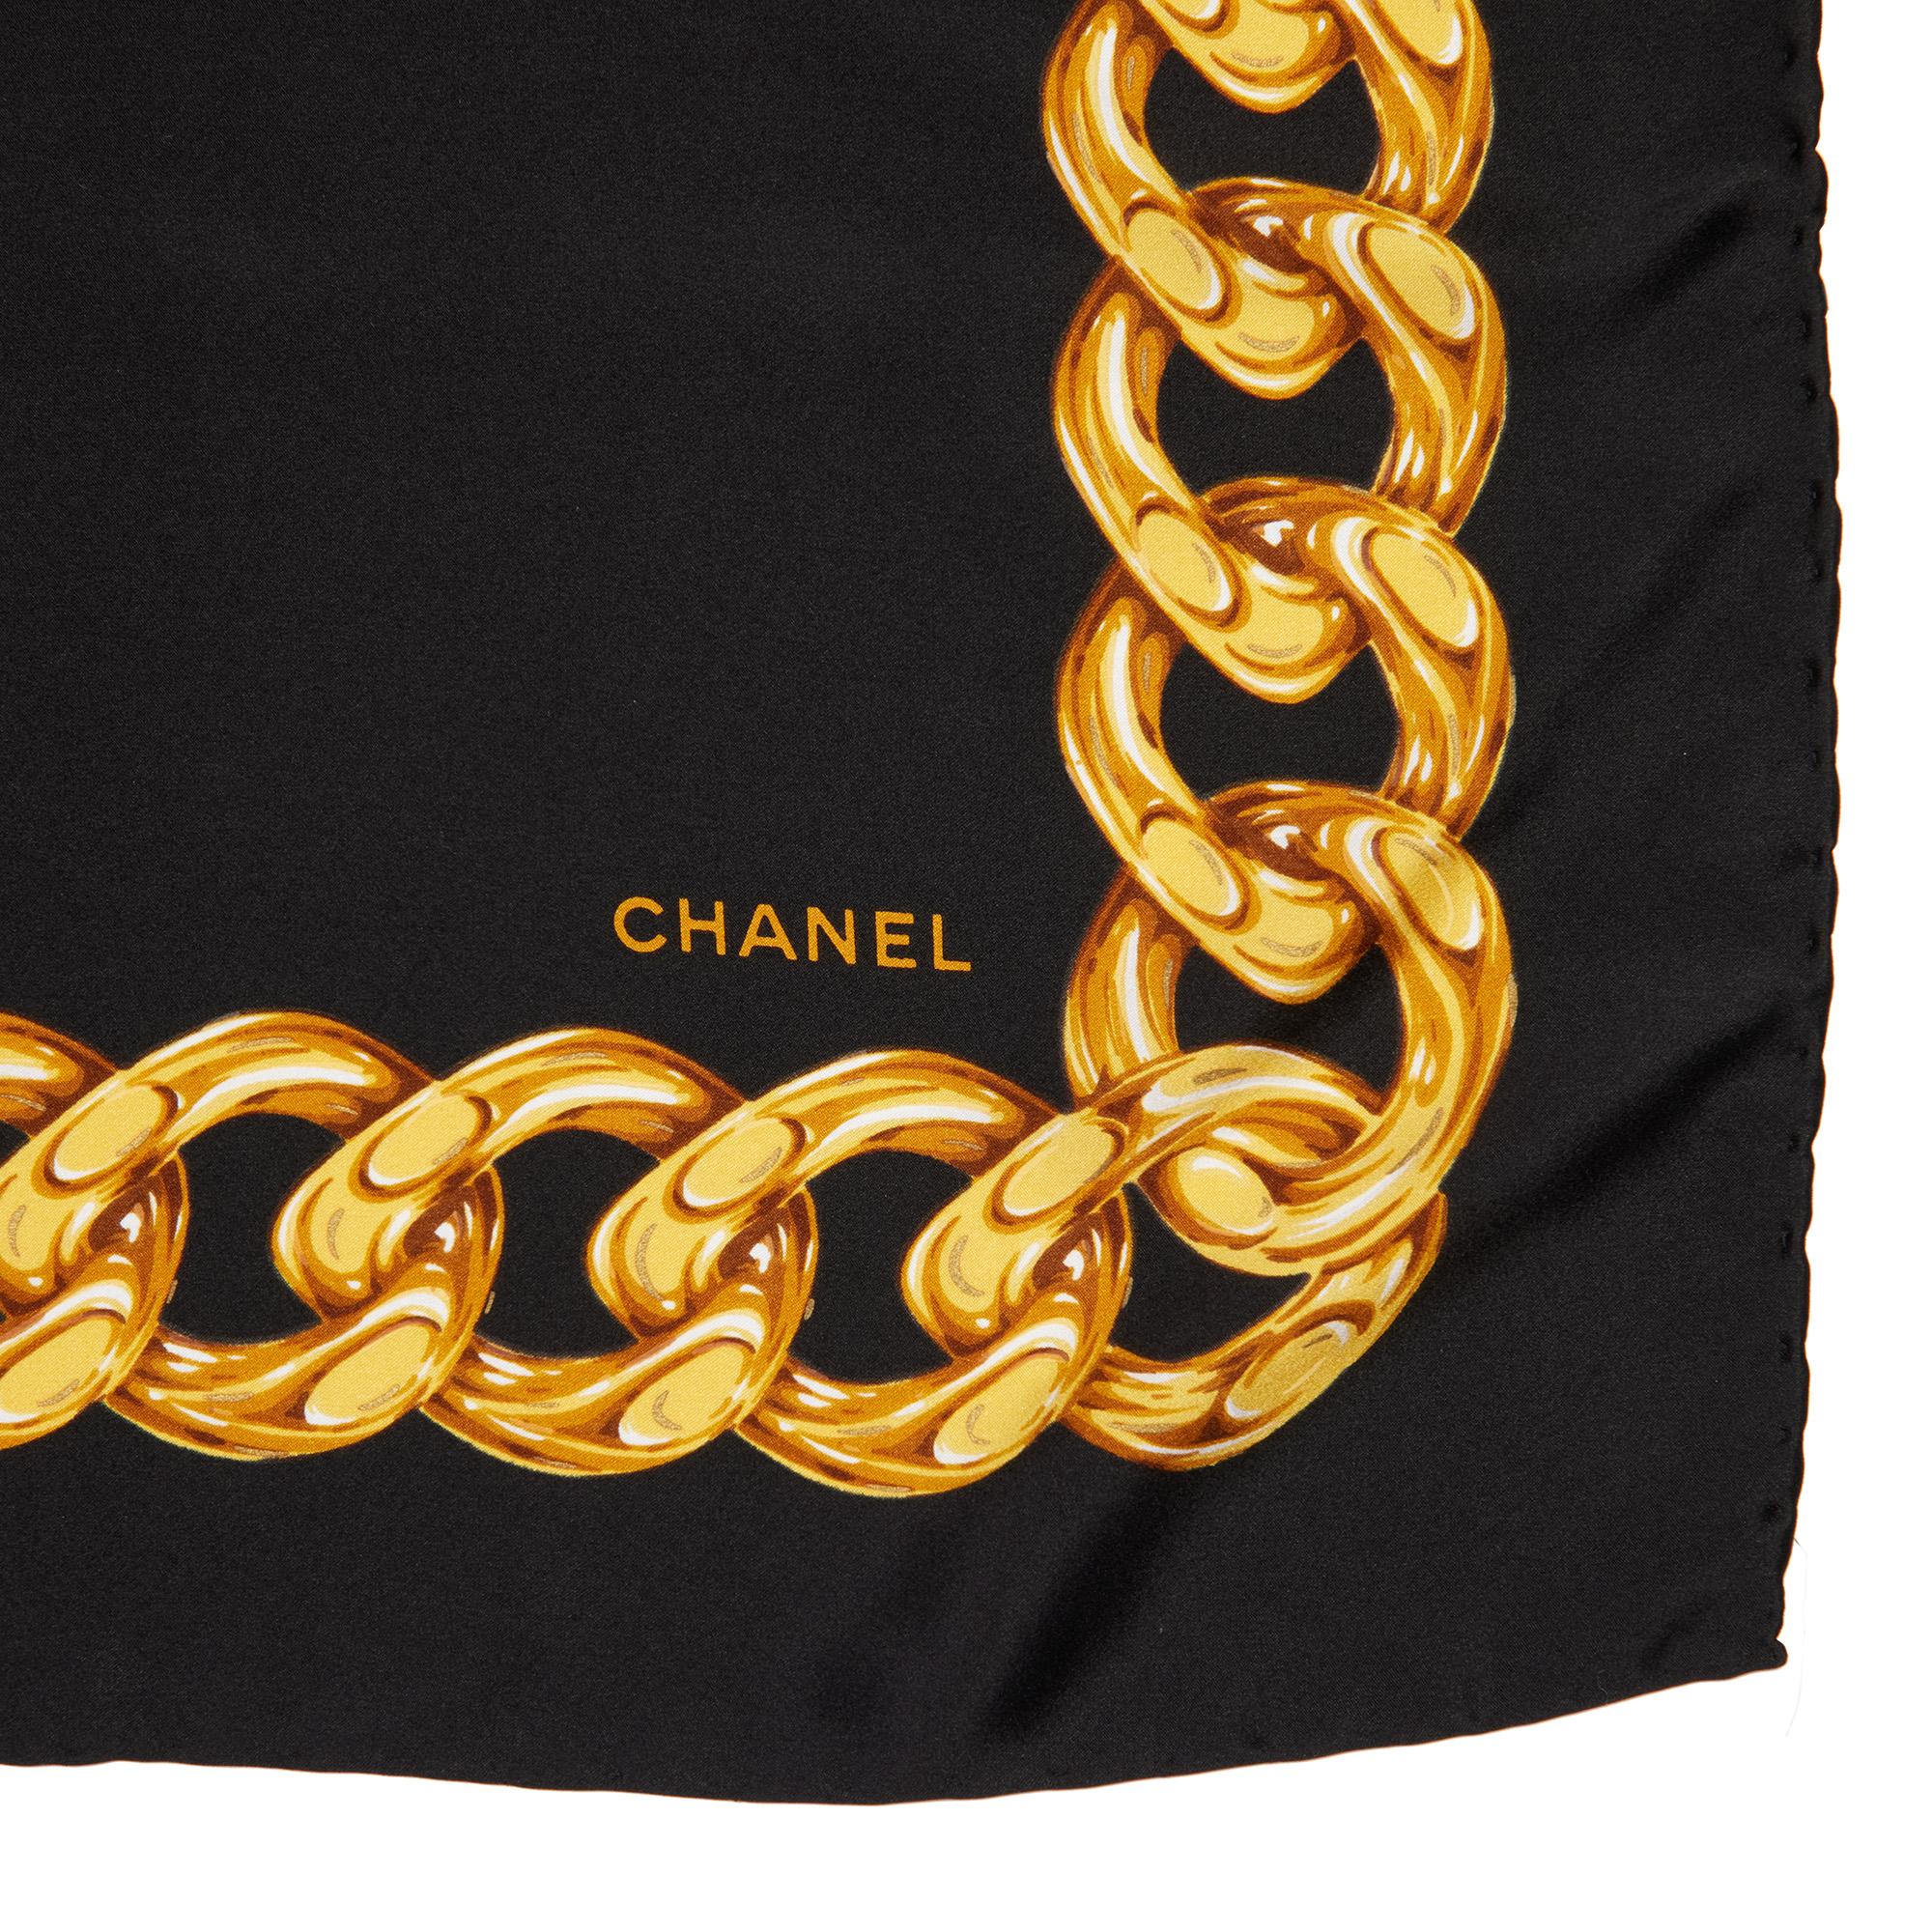 Chanel BLACK, GOLD & GREEN FLORAL SILK VINTAGE CC SCARF

CONDITION NOTES
The exterior is in excellent condition with minimal signs of use.
Overall this item is in excellent pre-owned condition. Please note the majority of the items we sell are